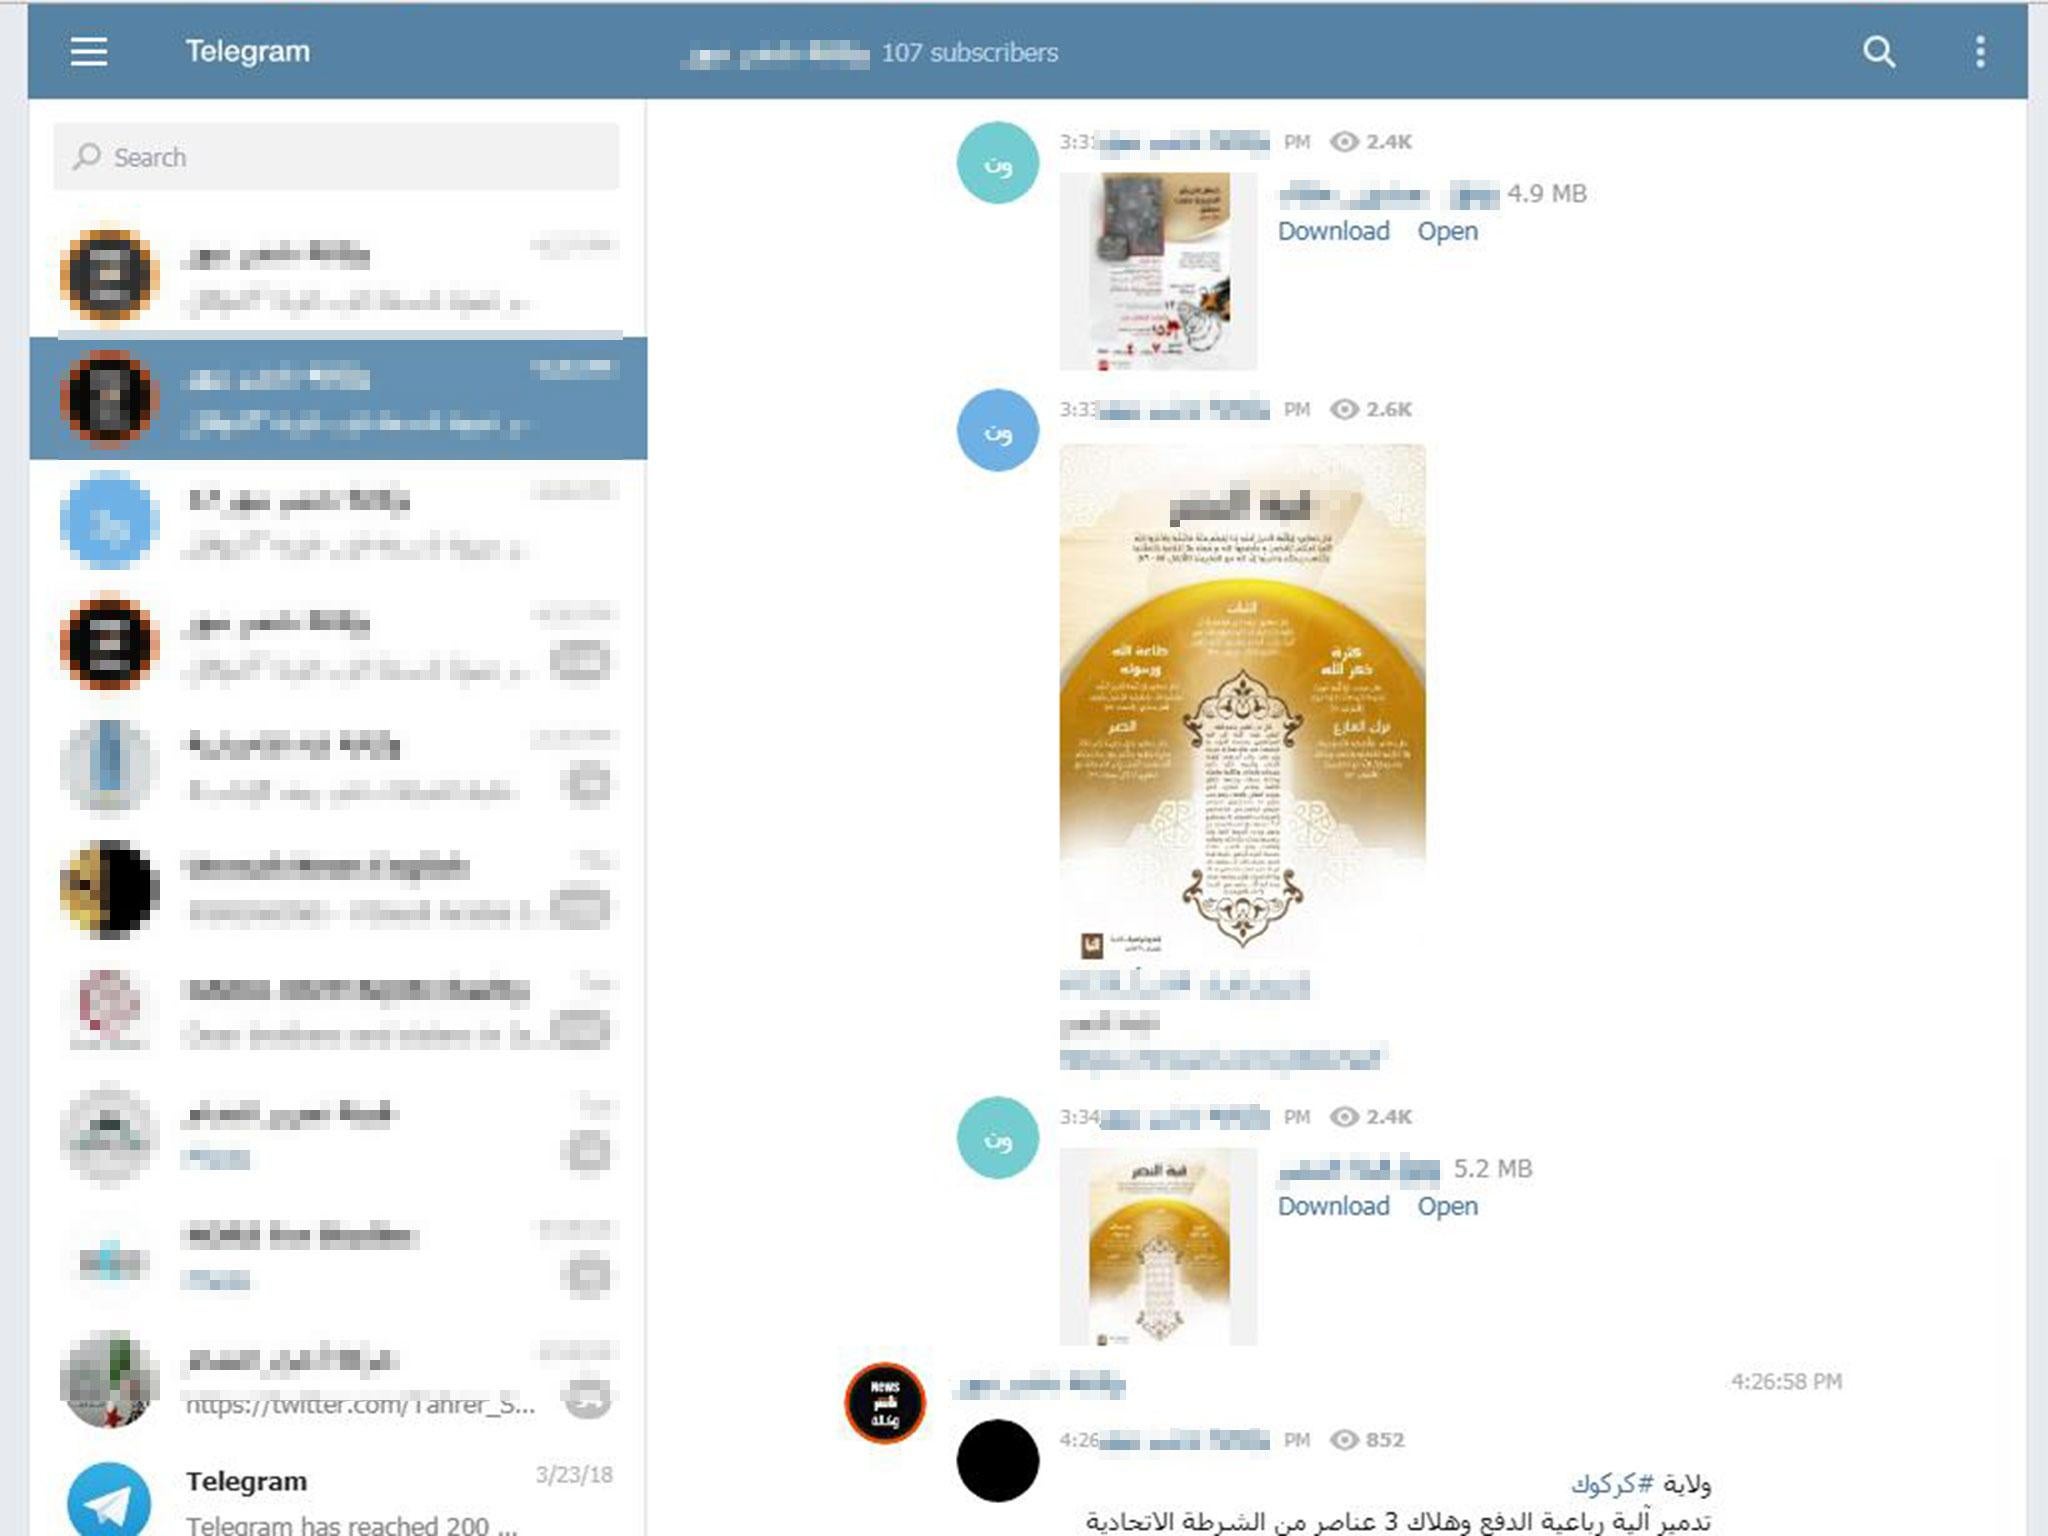 Isis' propaganda feeds on Telegram, seen here on 27 April 2018, continued uninterrupted following a cyber strike led by Europol